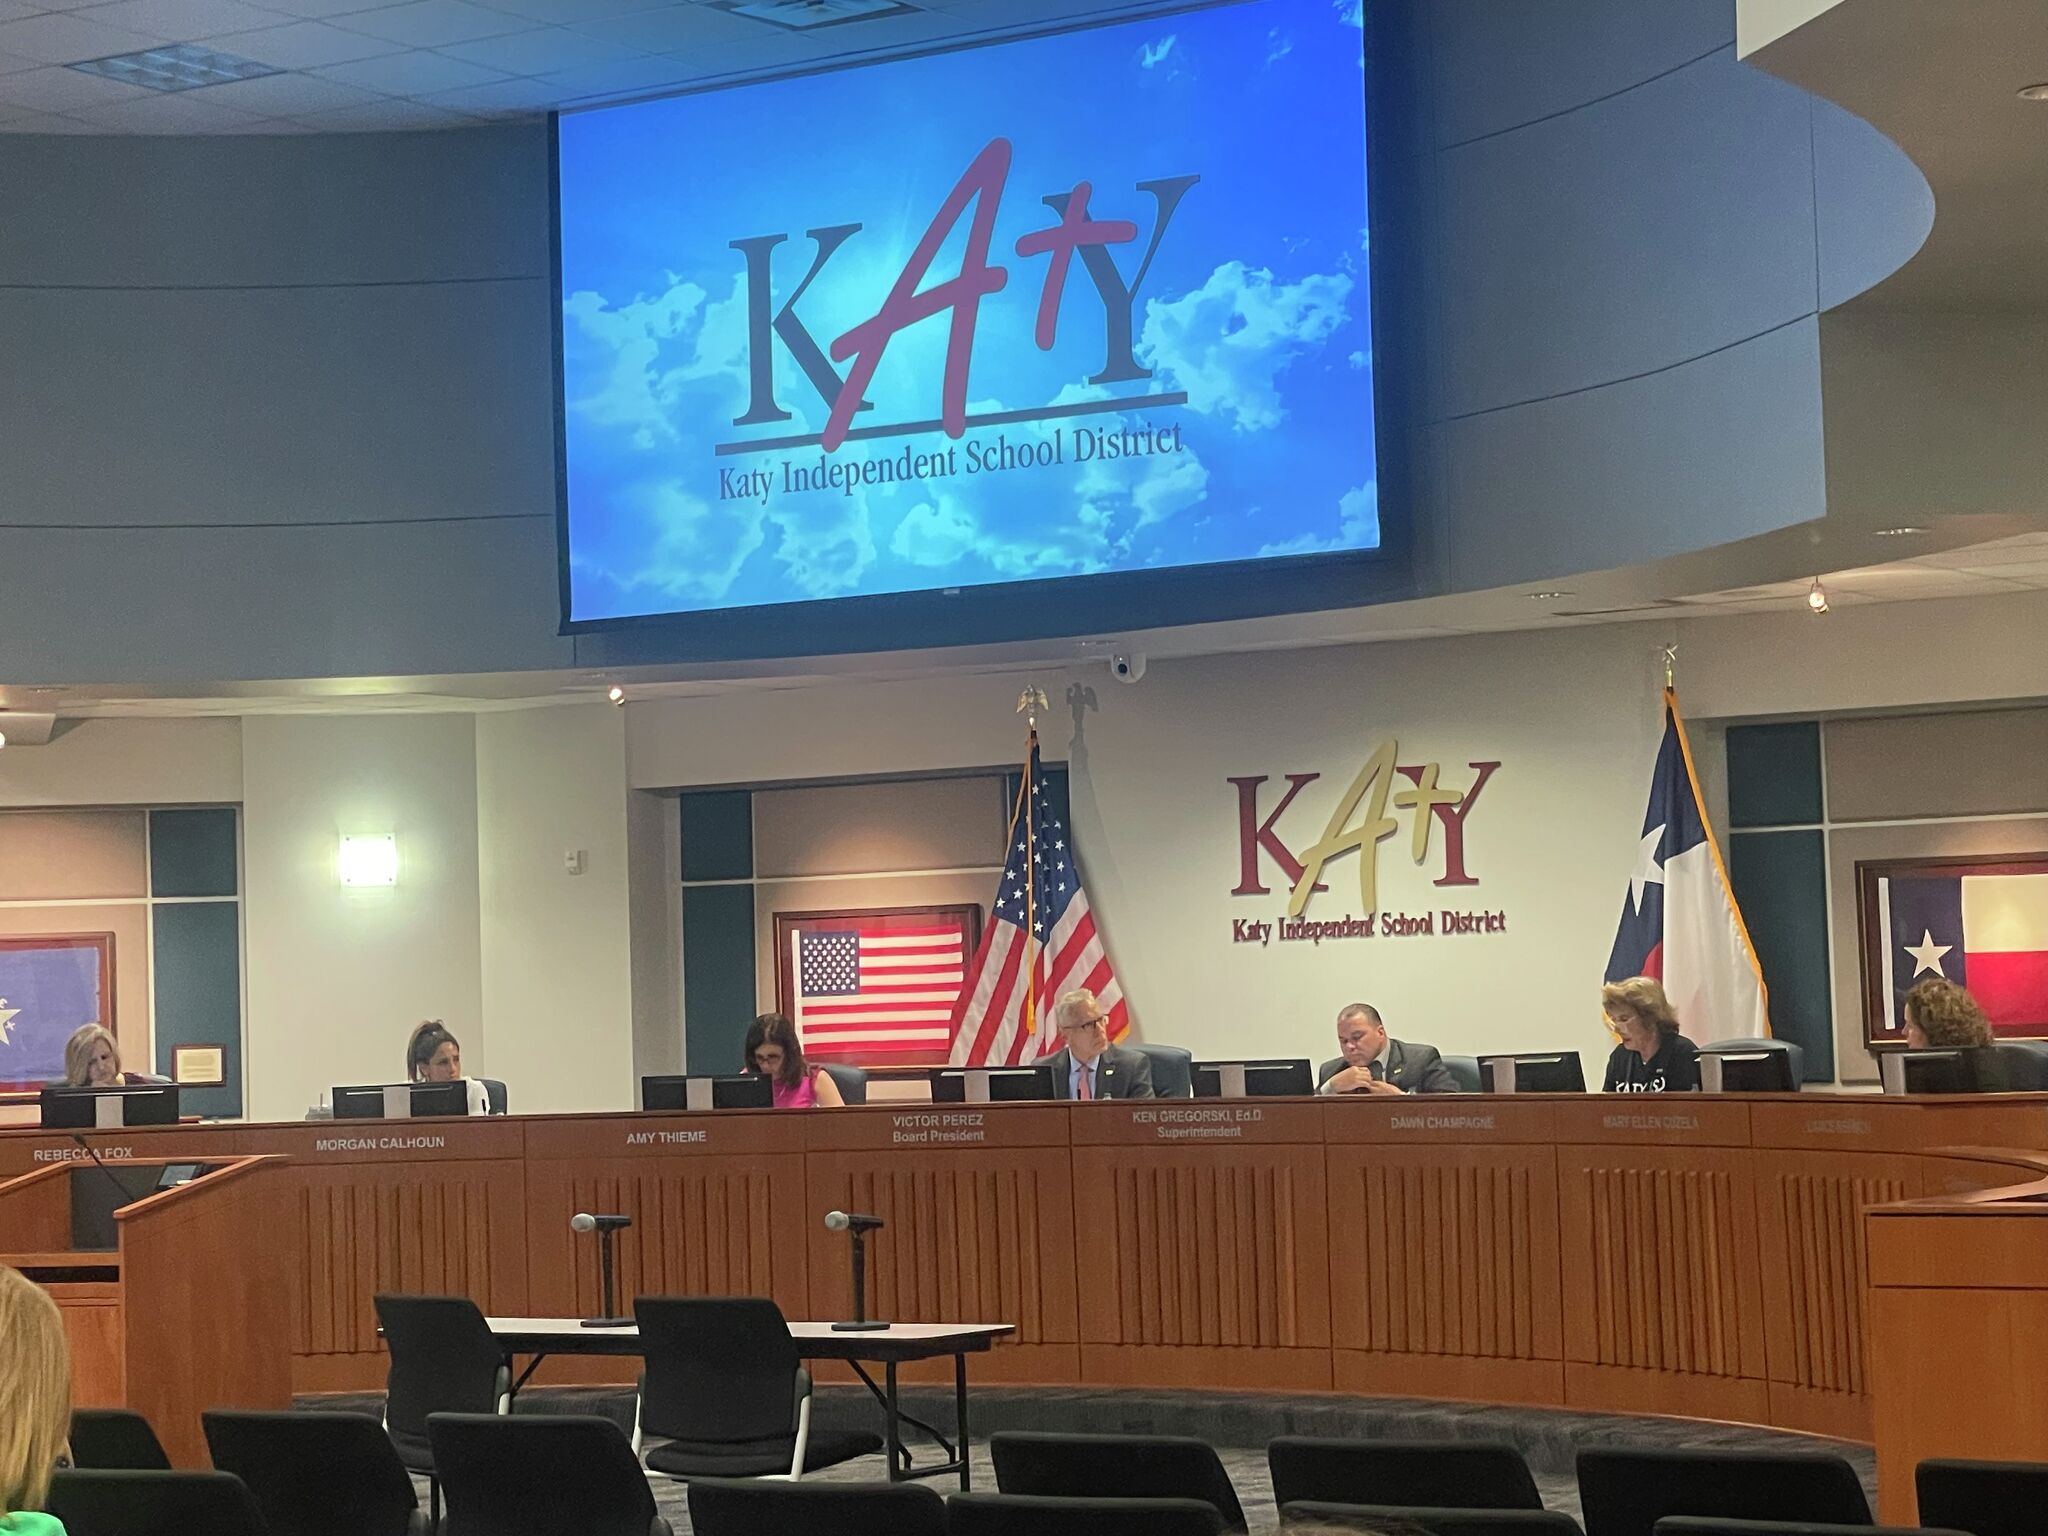 Katy ISD calls for 840.6M bond election to fund new schools, more